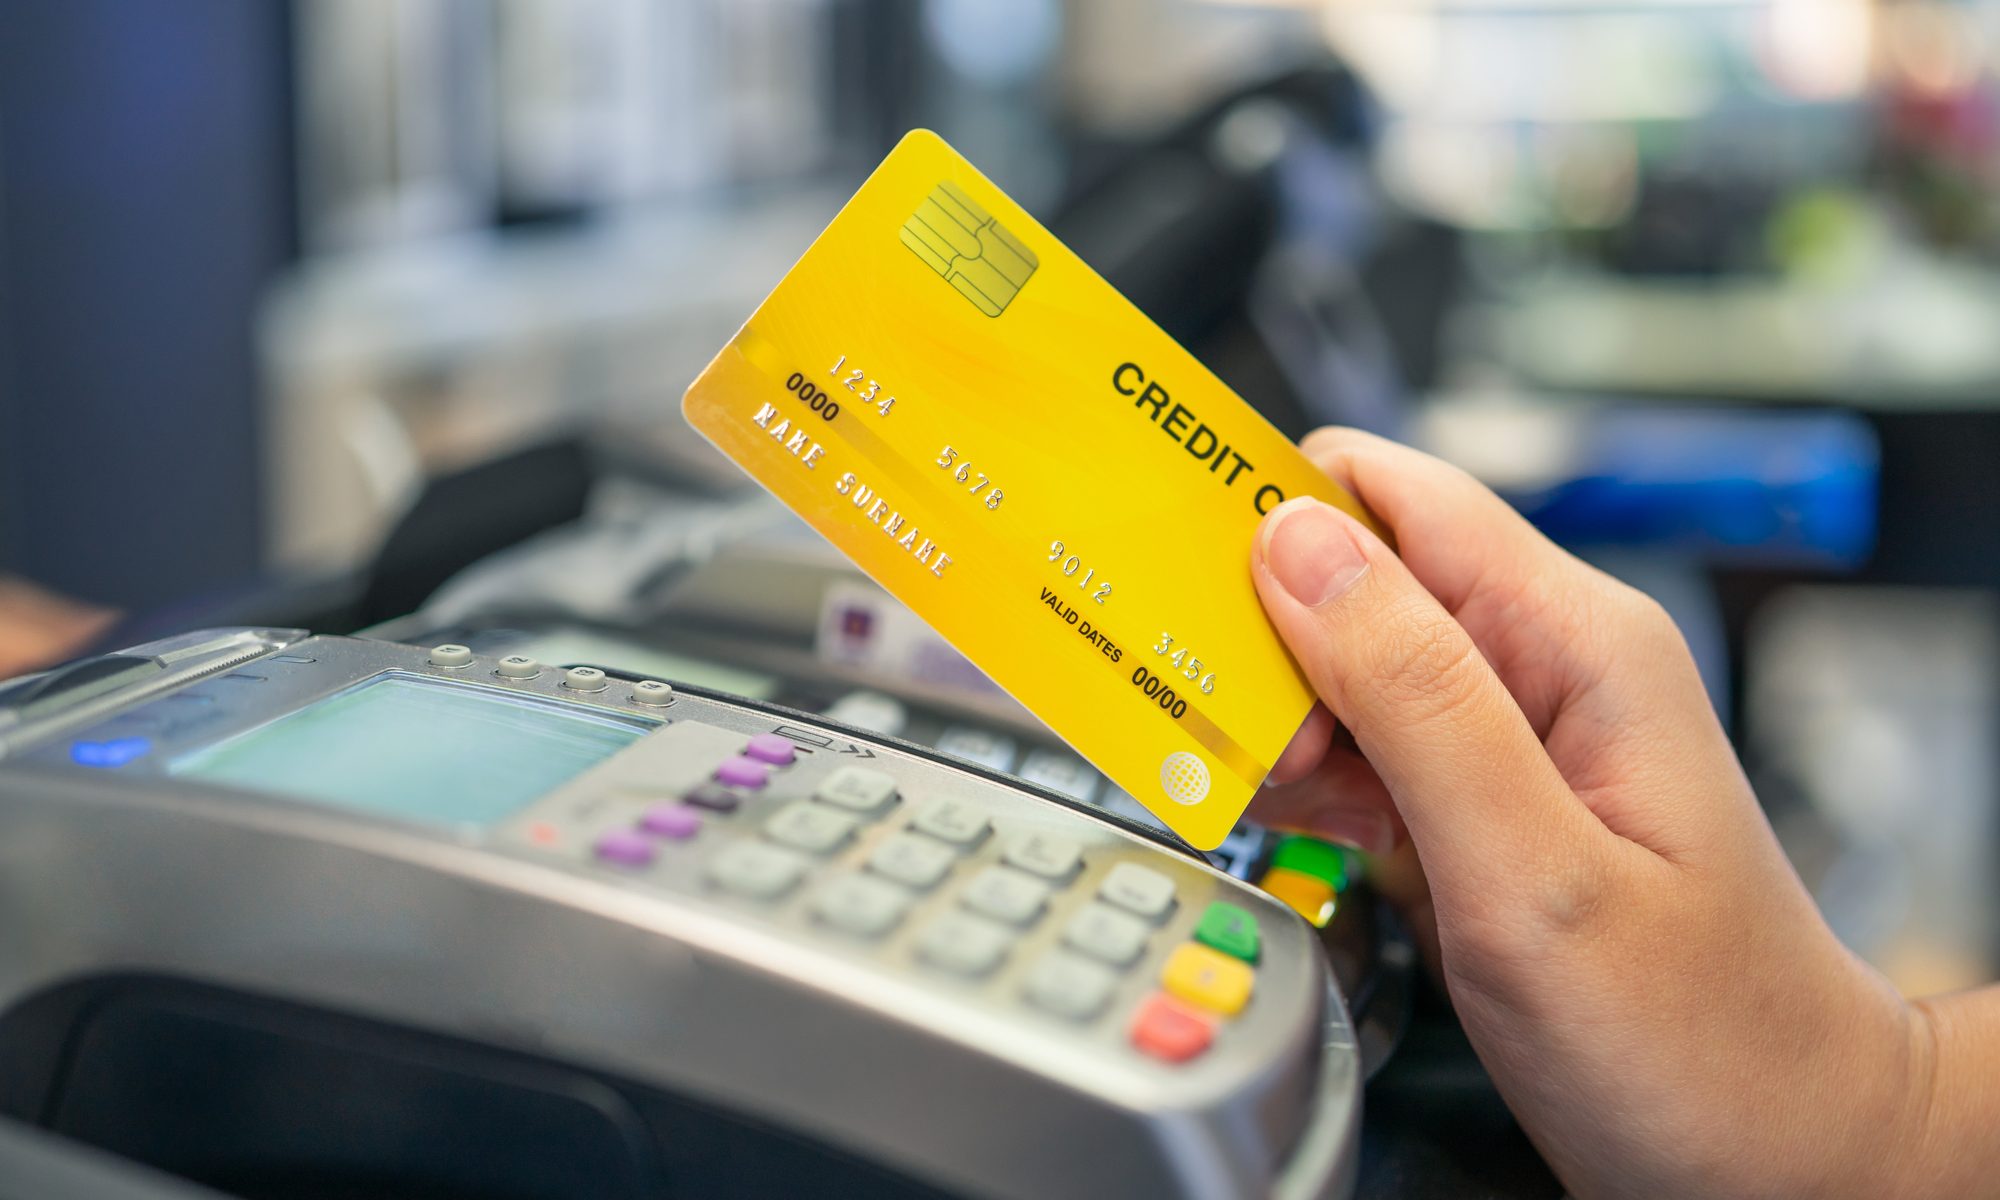 photograph of hand holding credit card over swipe machine